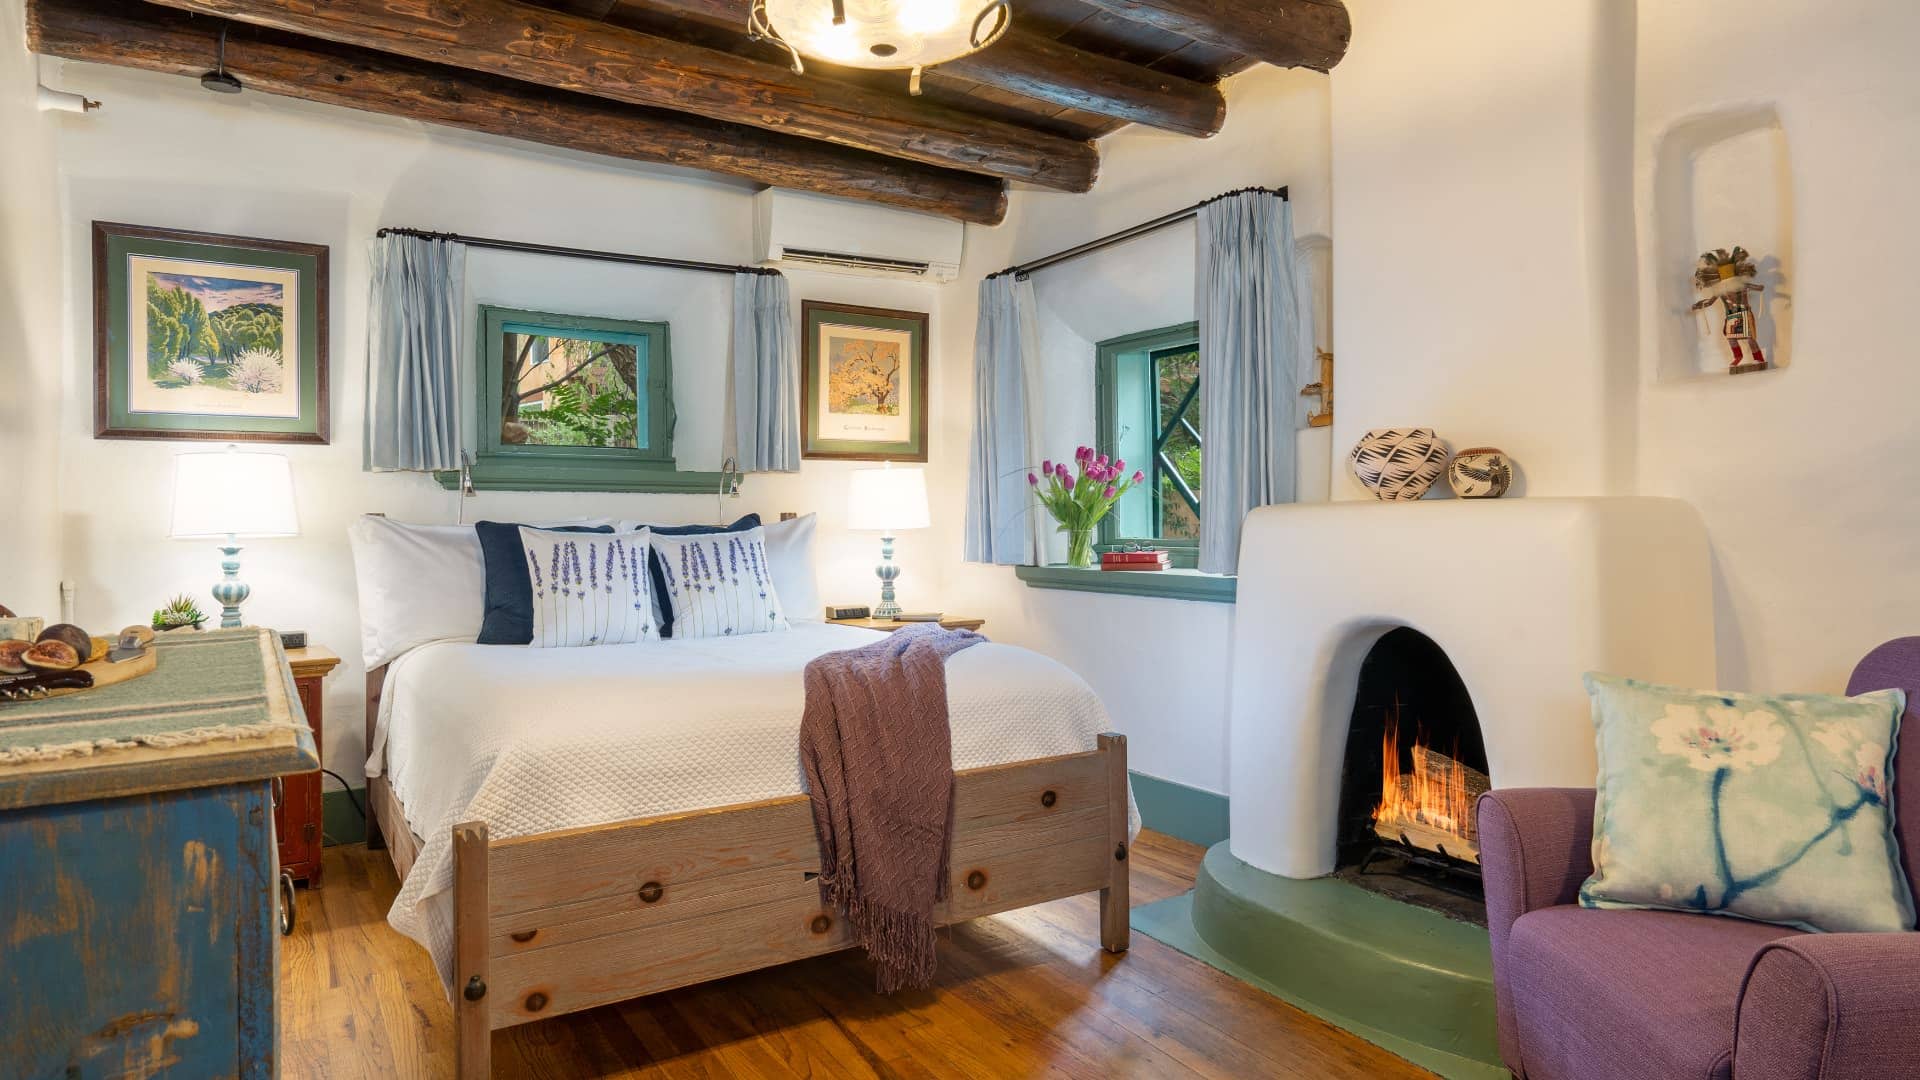 Cozy bedroom with southwest-style furniture, pueblo-style fireplace, bed made up in white and mauve armchairs.